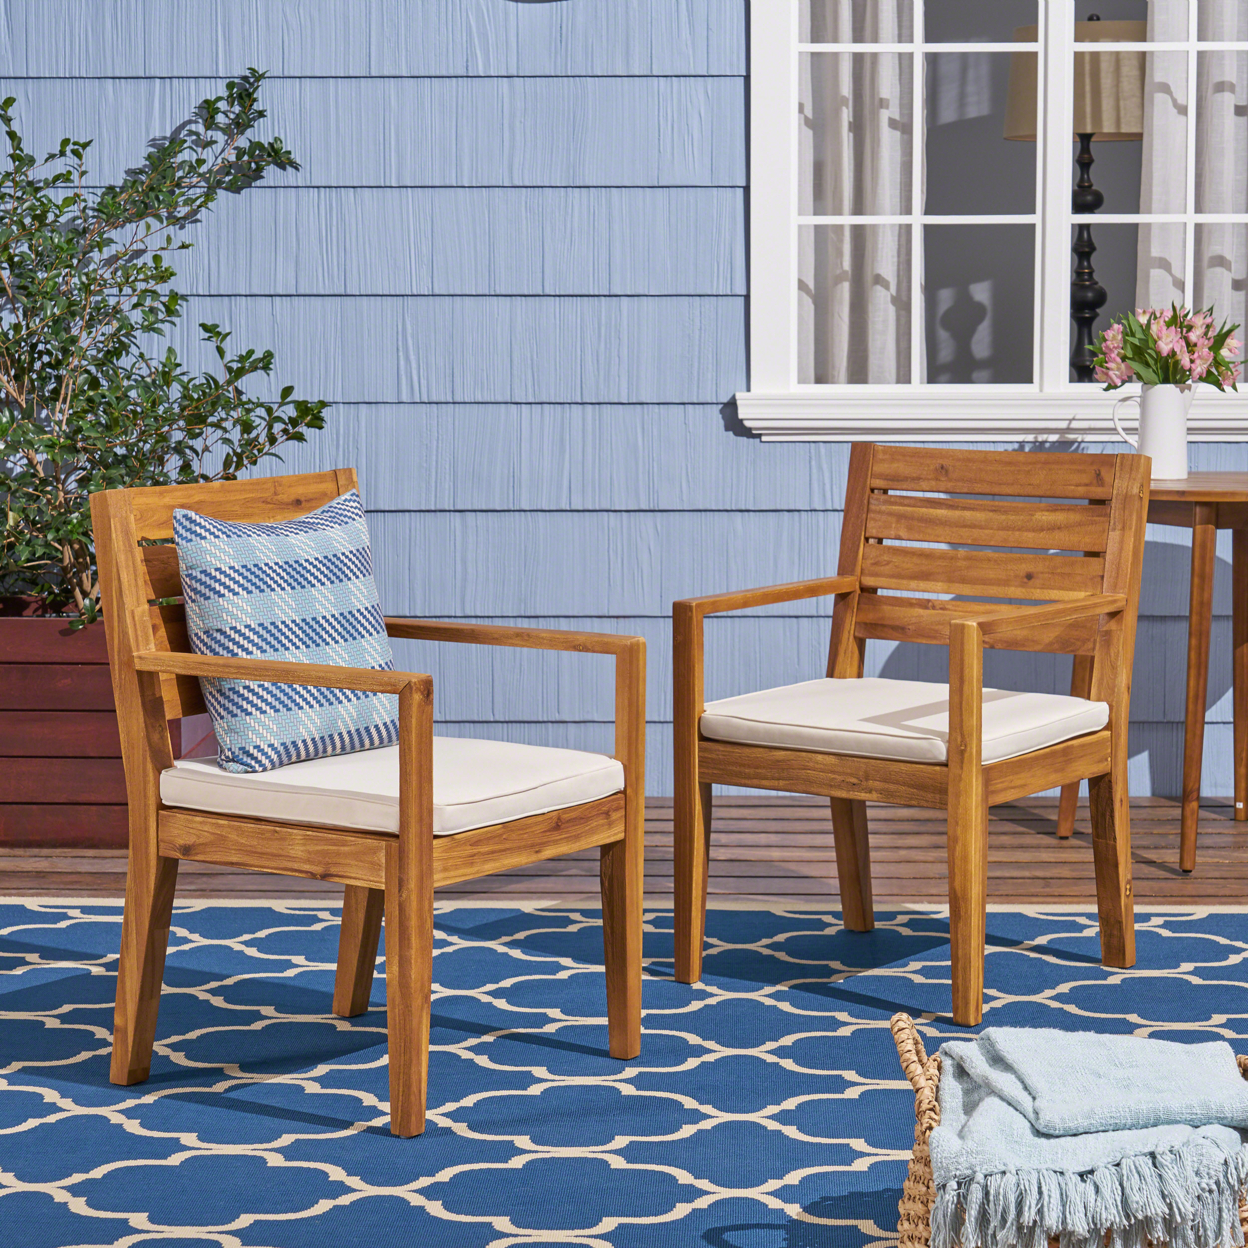 Arely Outdoor Acacia Wood Dining Chairs(Set Of 2) - Sandblast Natural Finish + Cream